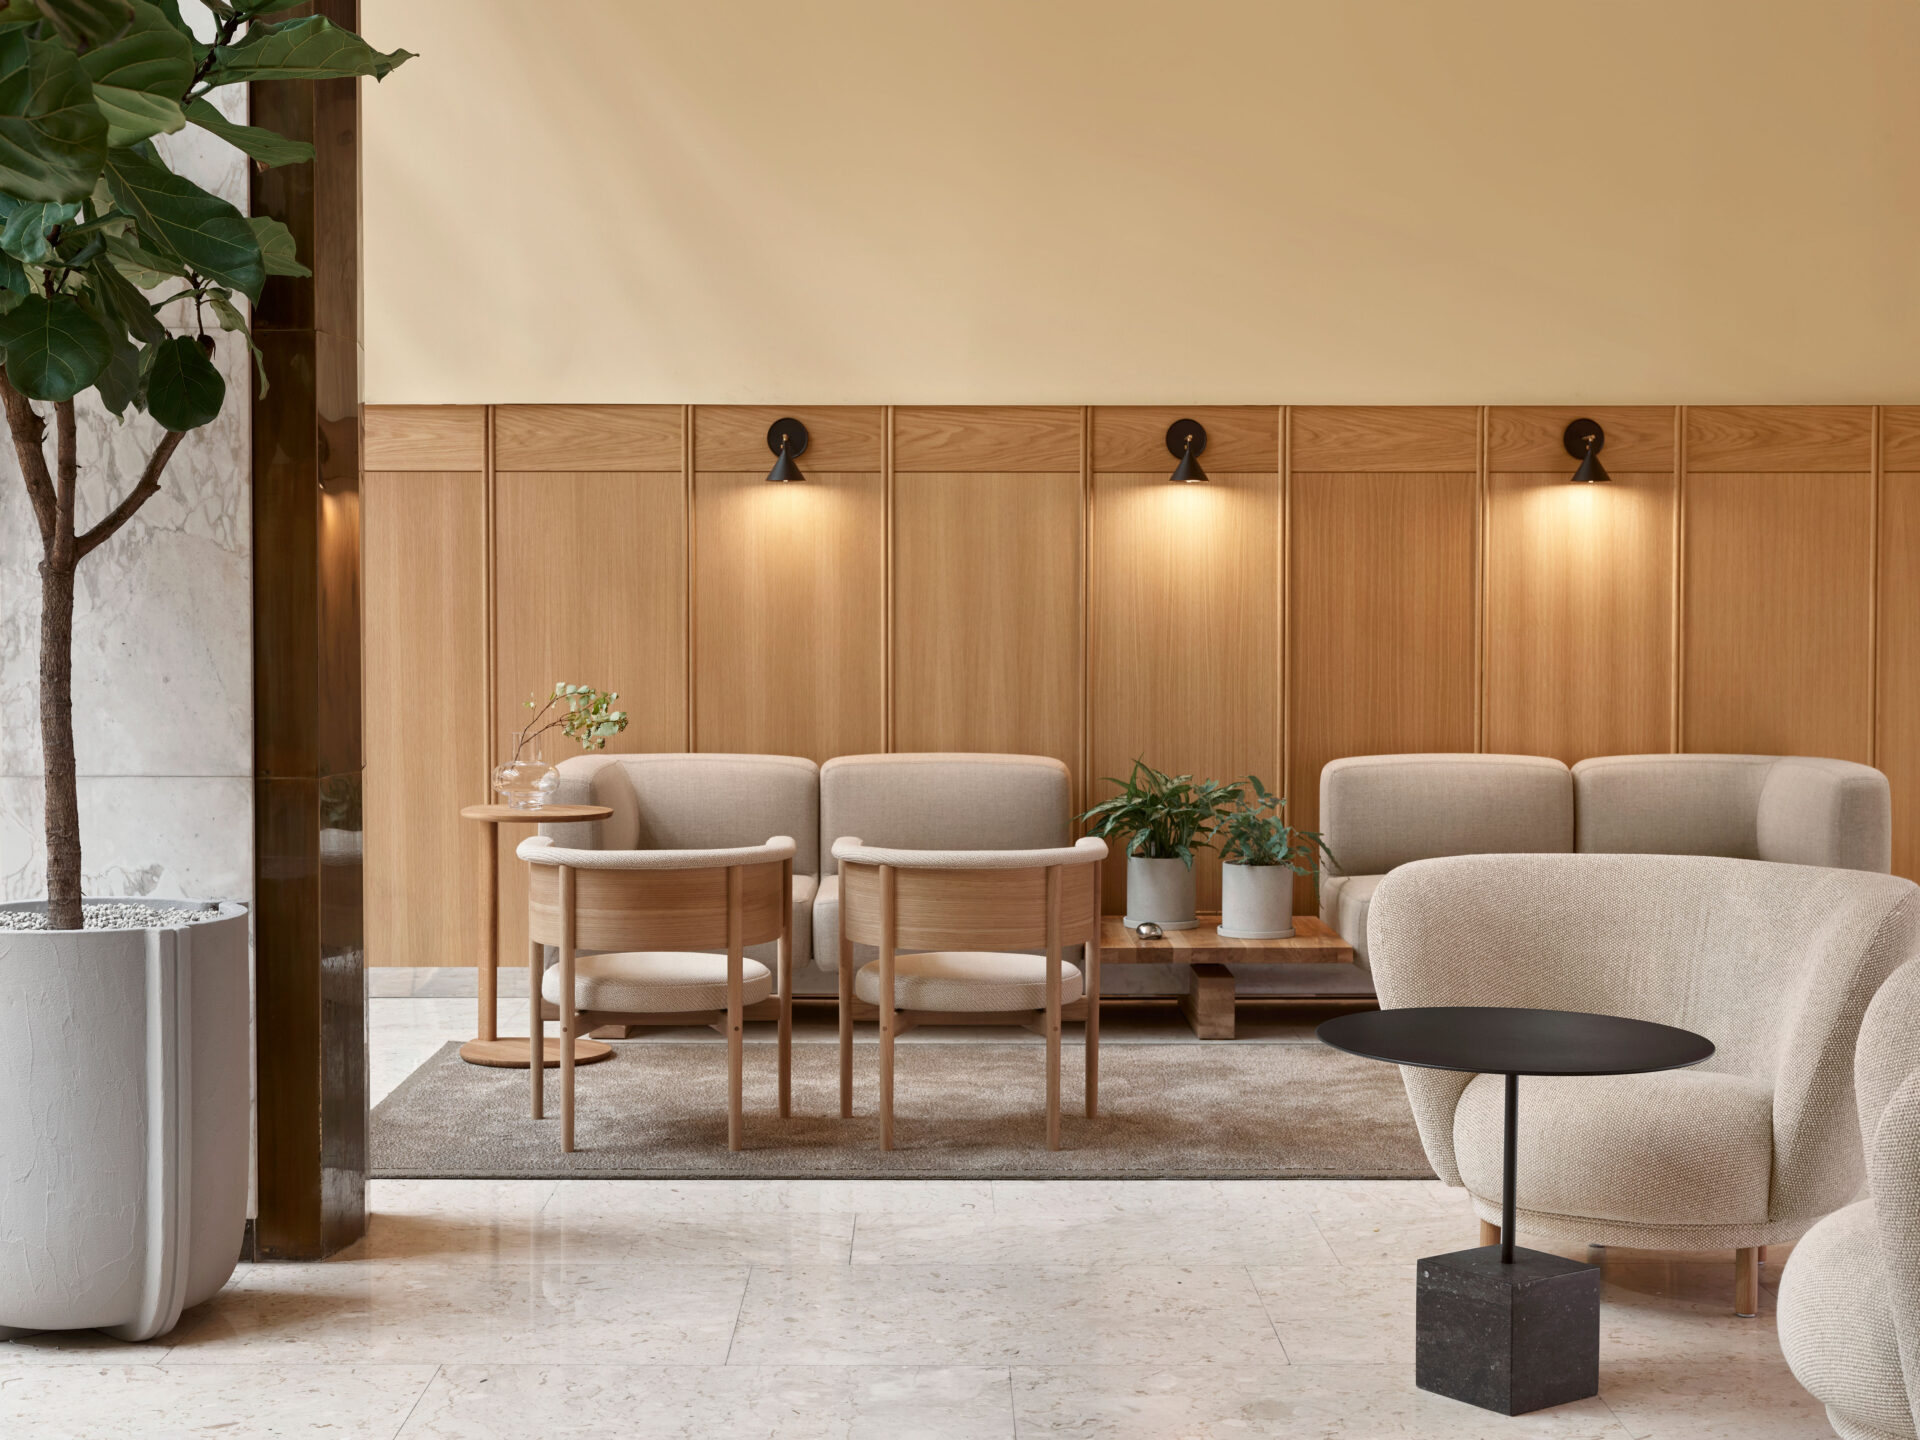 office lounge with light crème color furniture, wooden panels, black wall lights, a large plant on the left